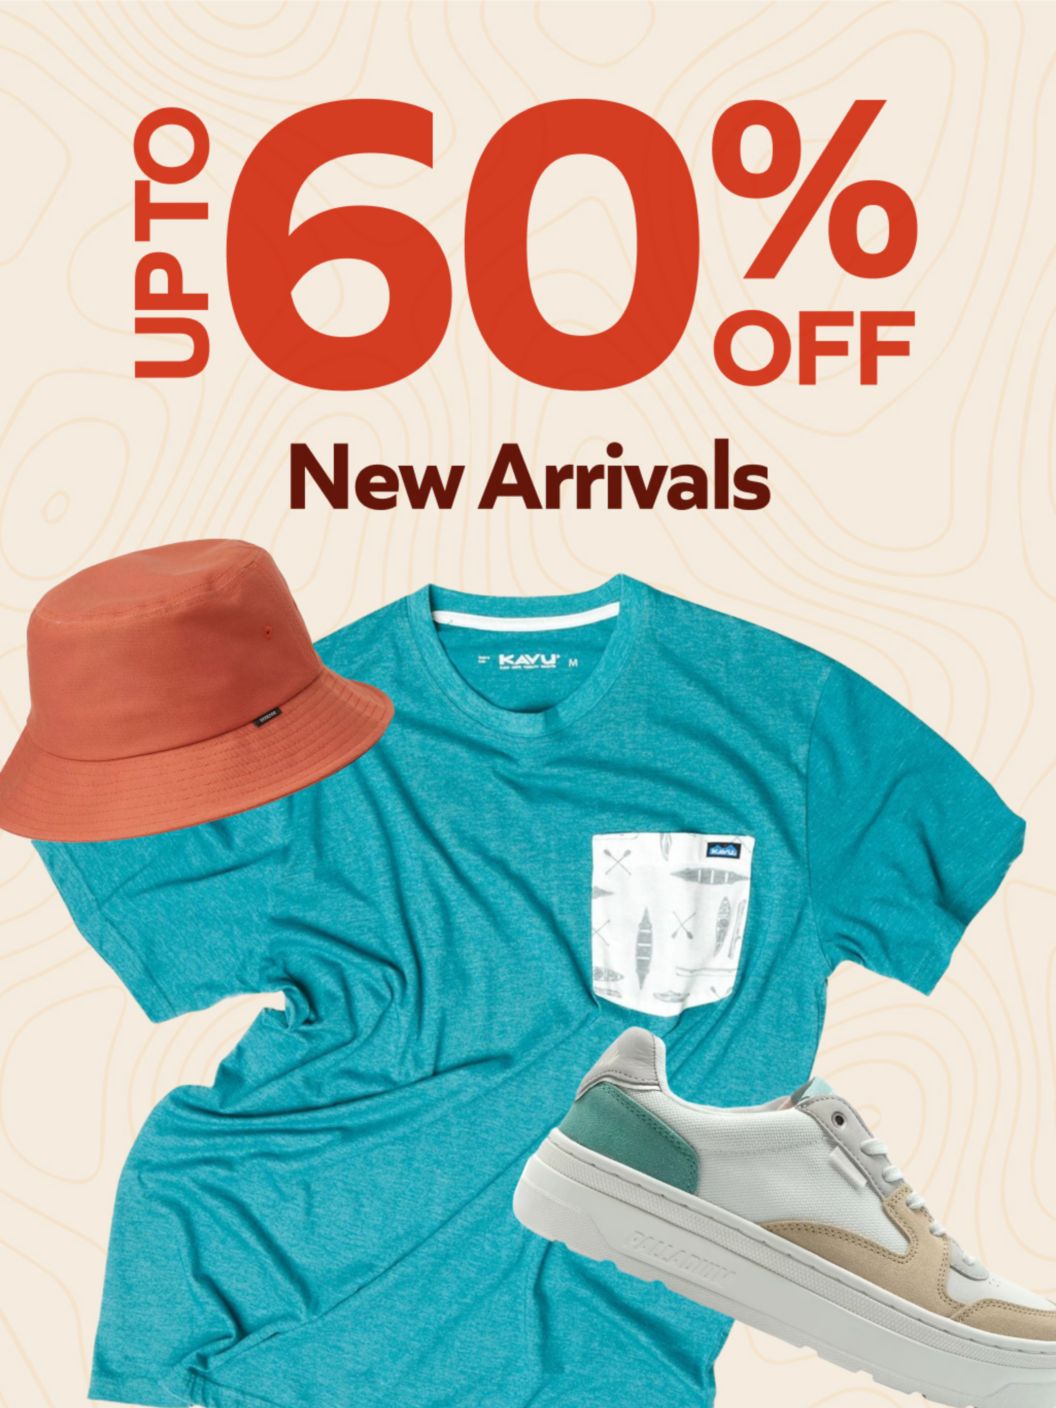 New arrivals up to 60% off 